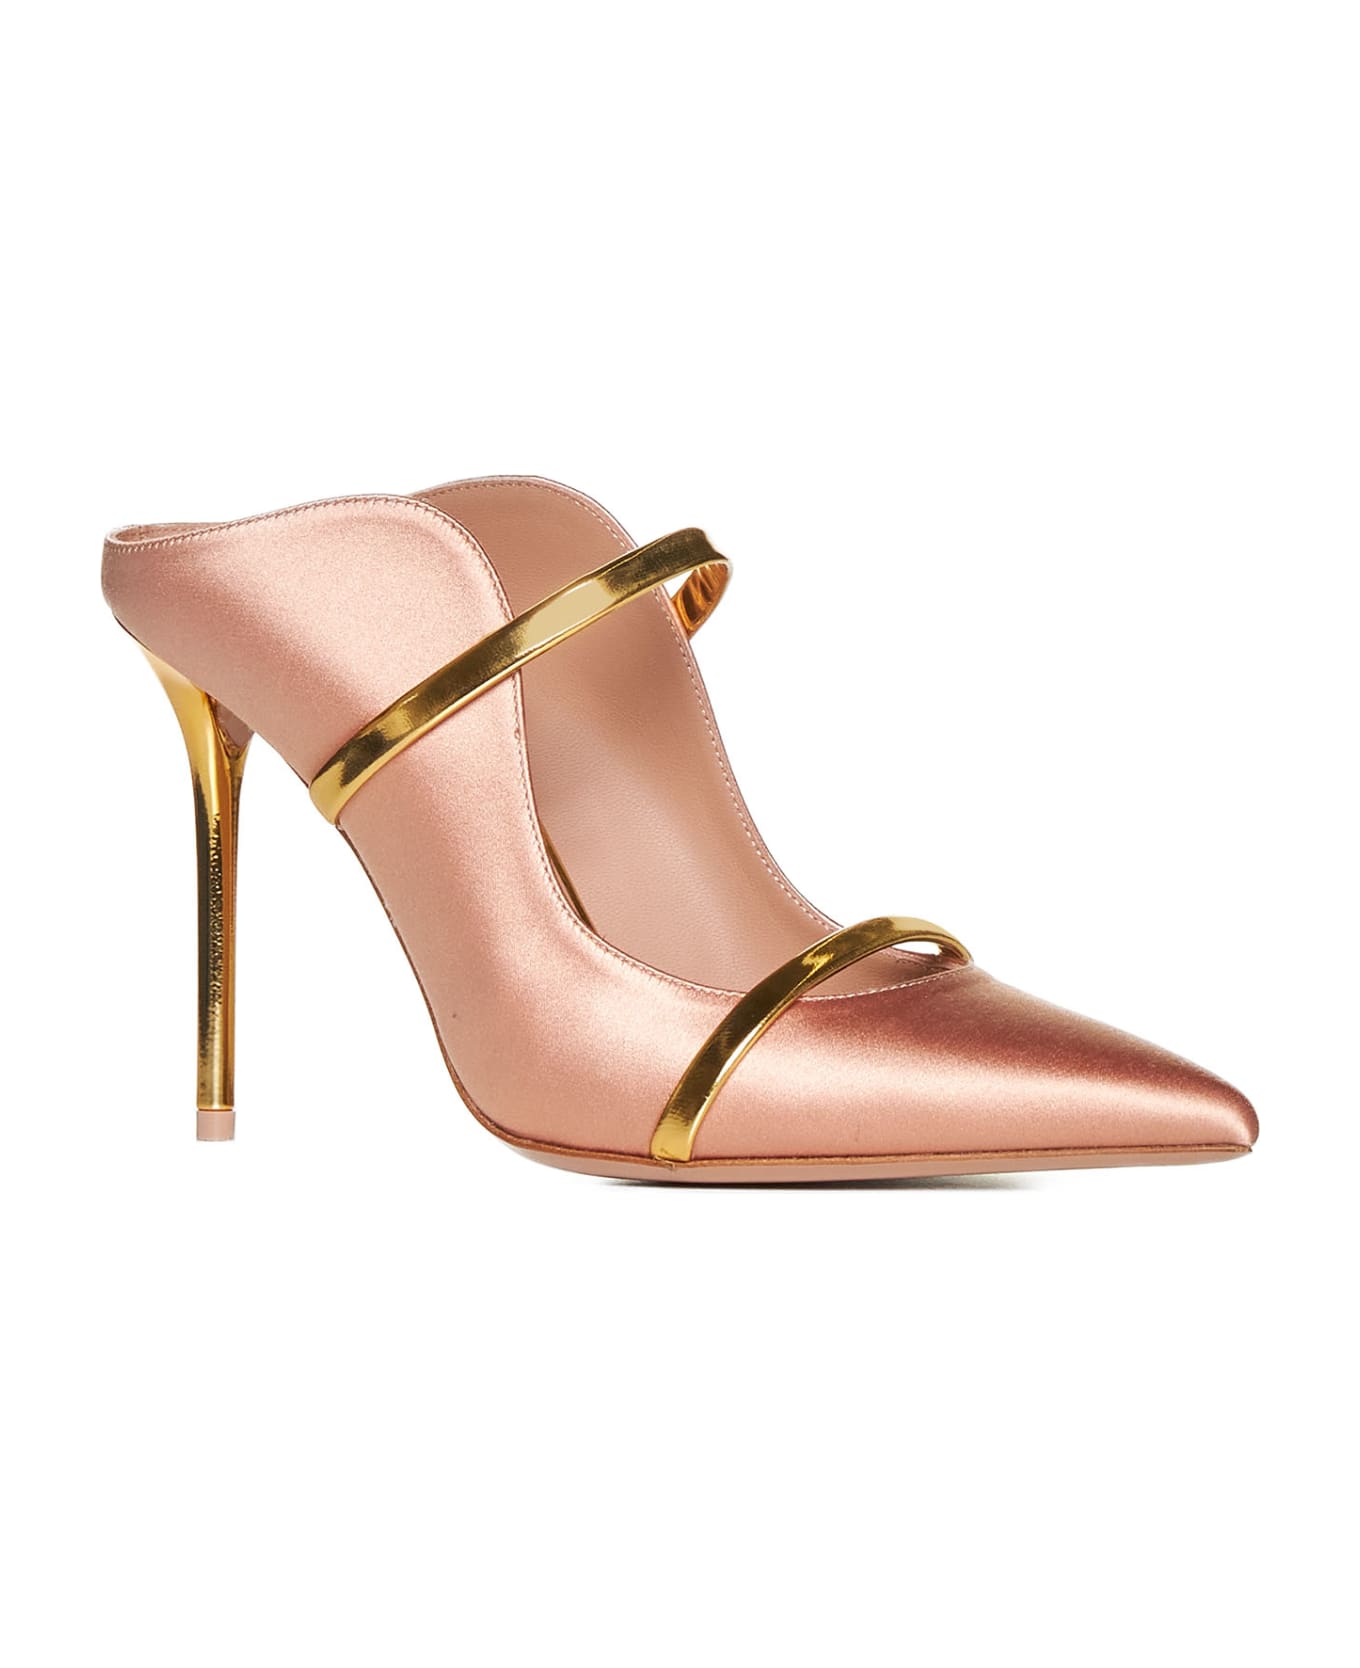 Malone Souliers Sandals - Blush/gold